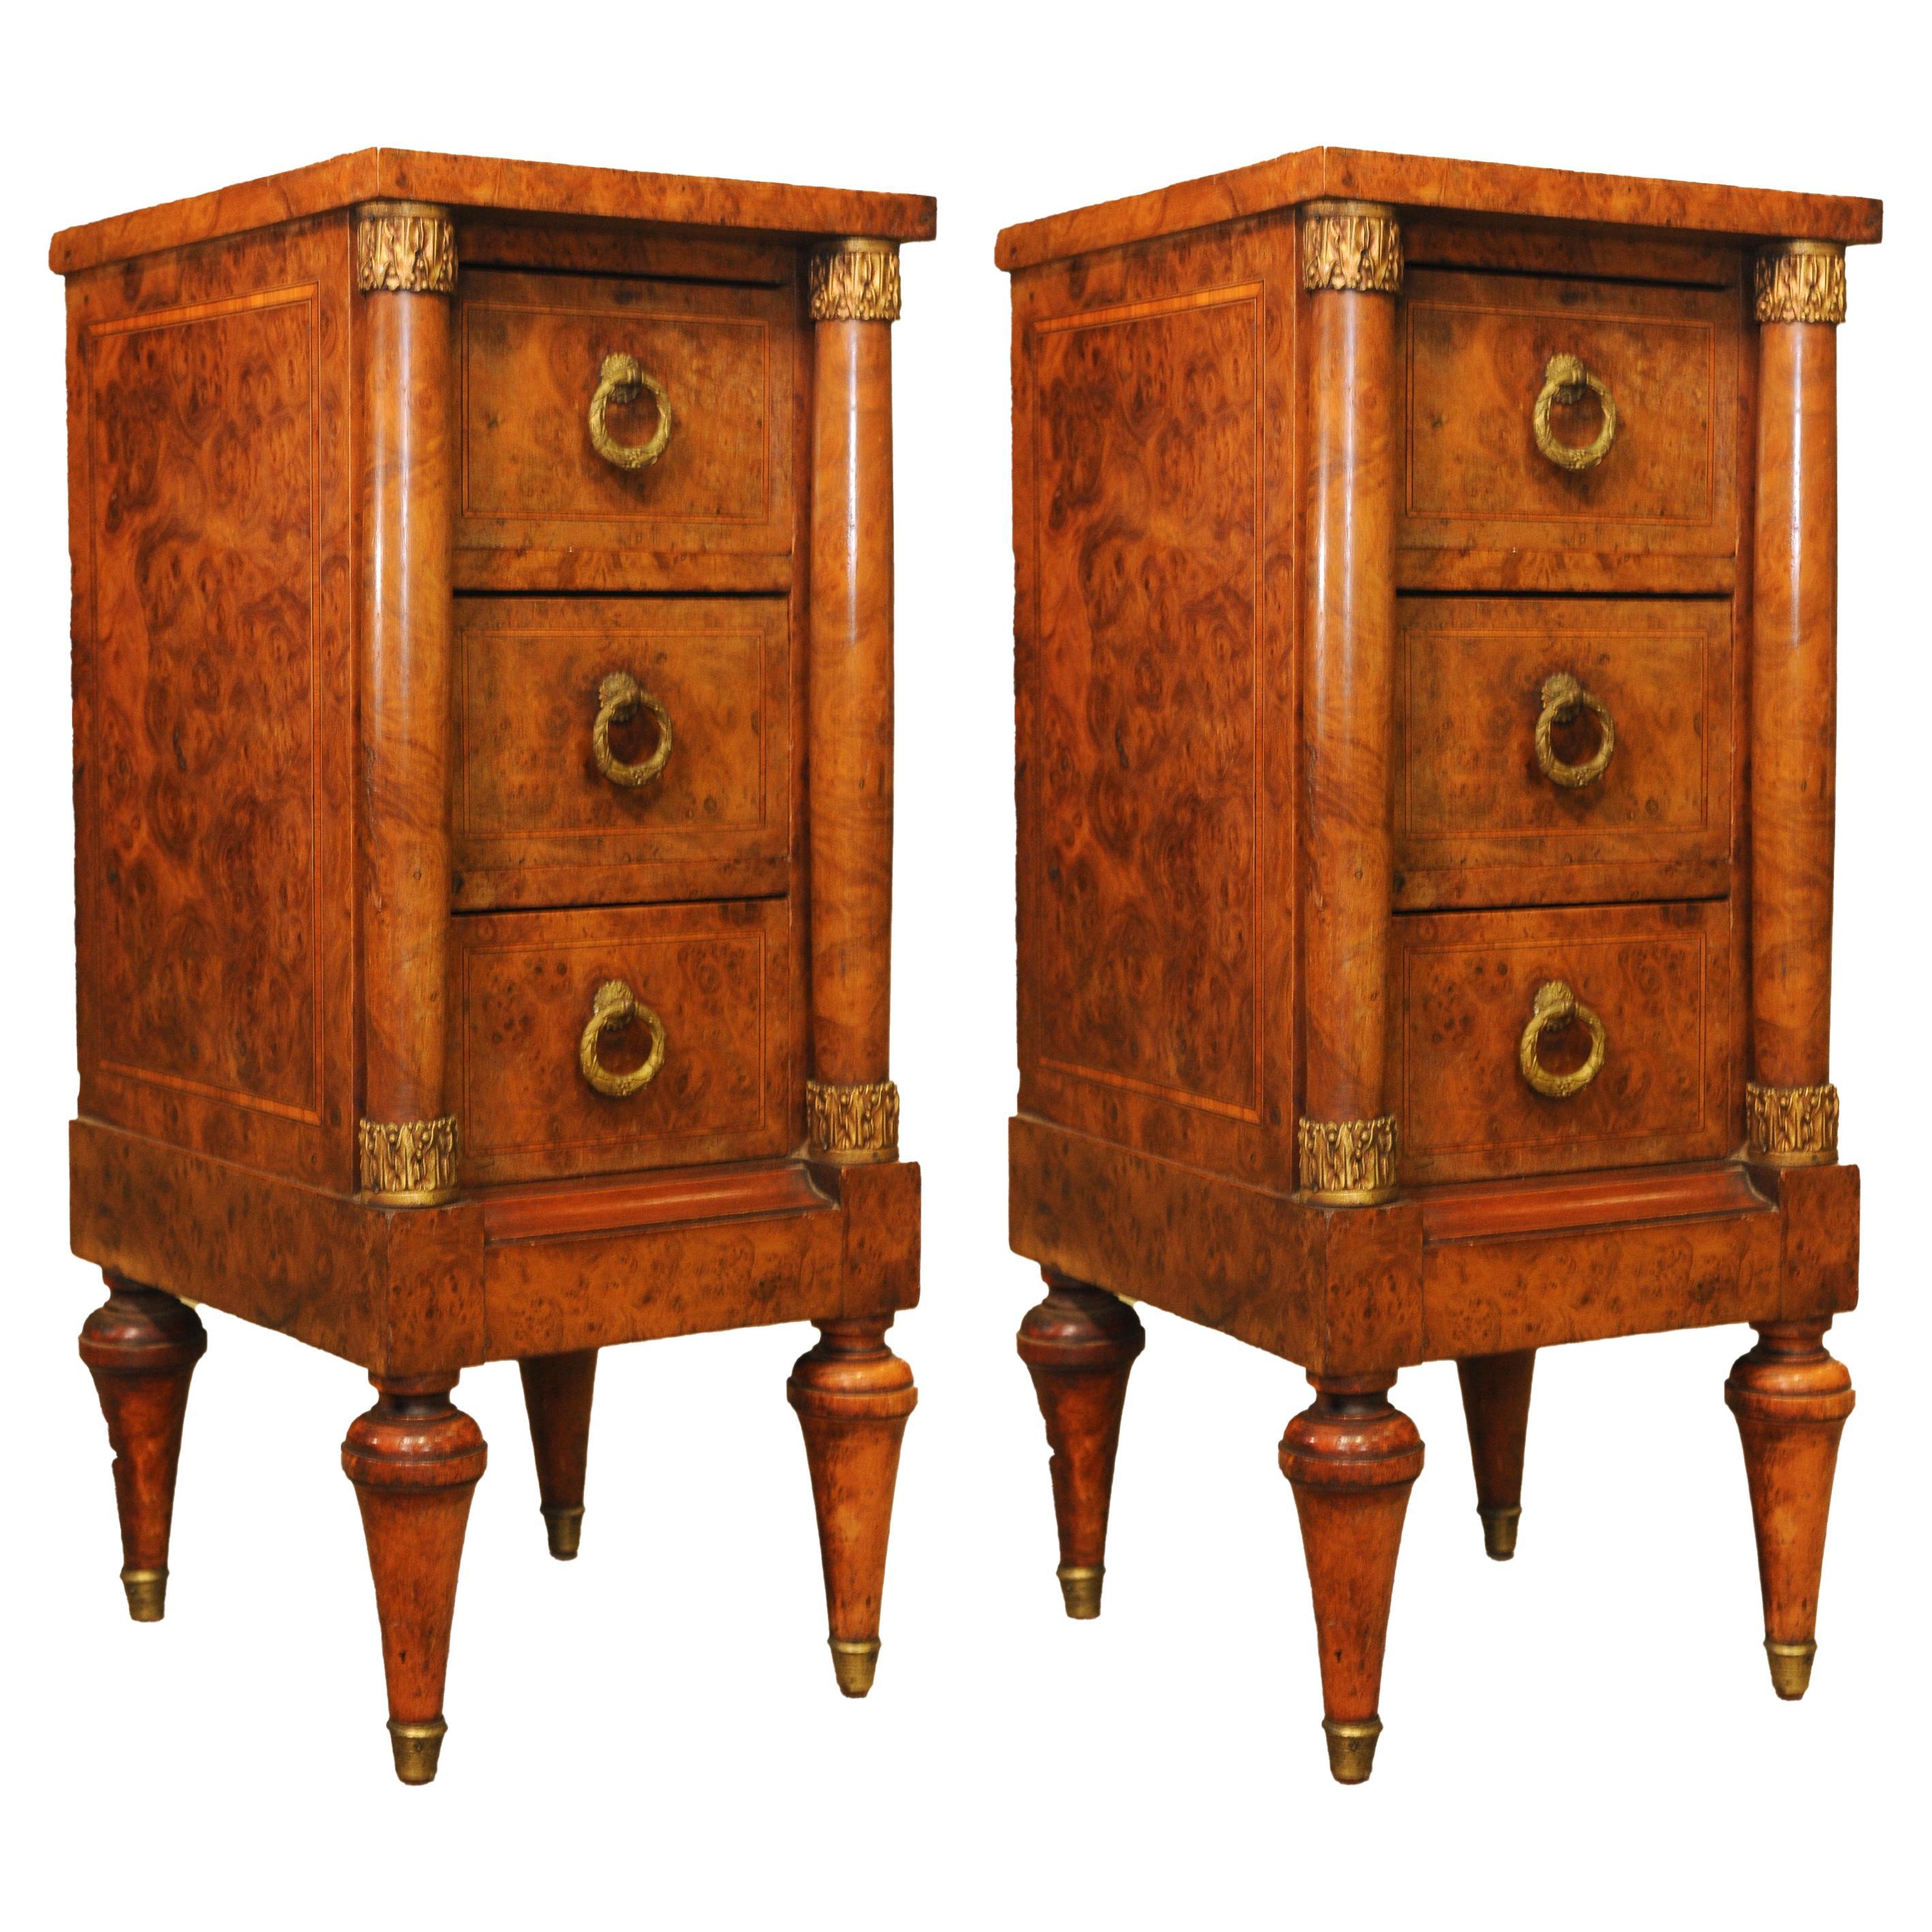 Exquisite Pair of French Empire Design Figured Walnut Three Drawer Nightstands For Sale